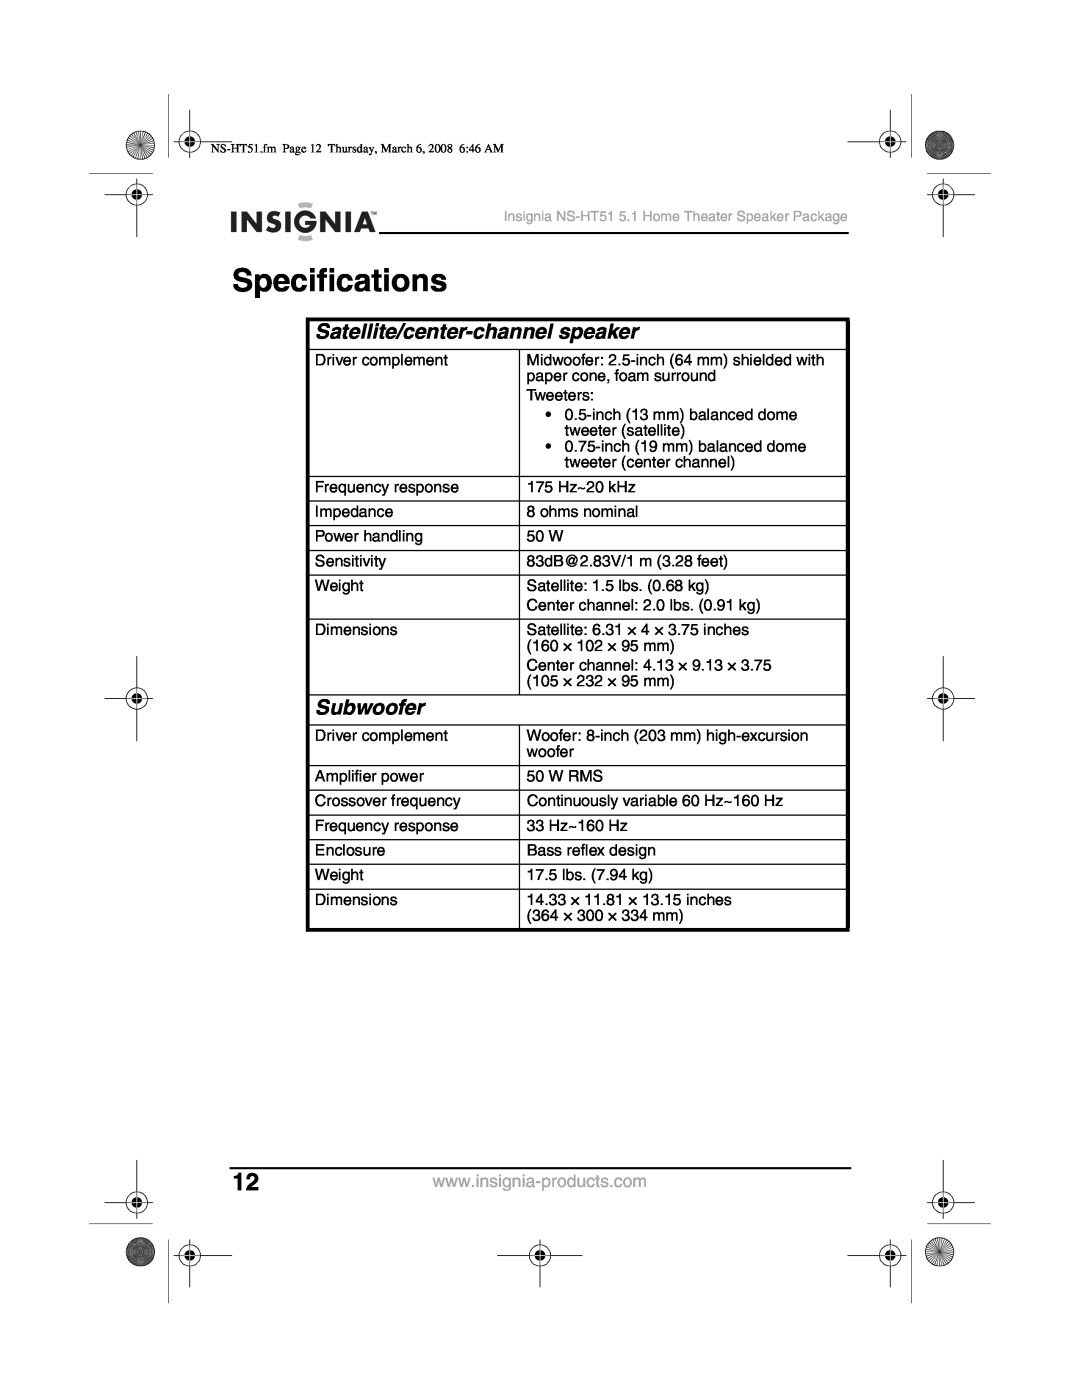 Insignia NS-HT51 manual Specifications, Satellite/center-channelspeaker, Subwoofer 